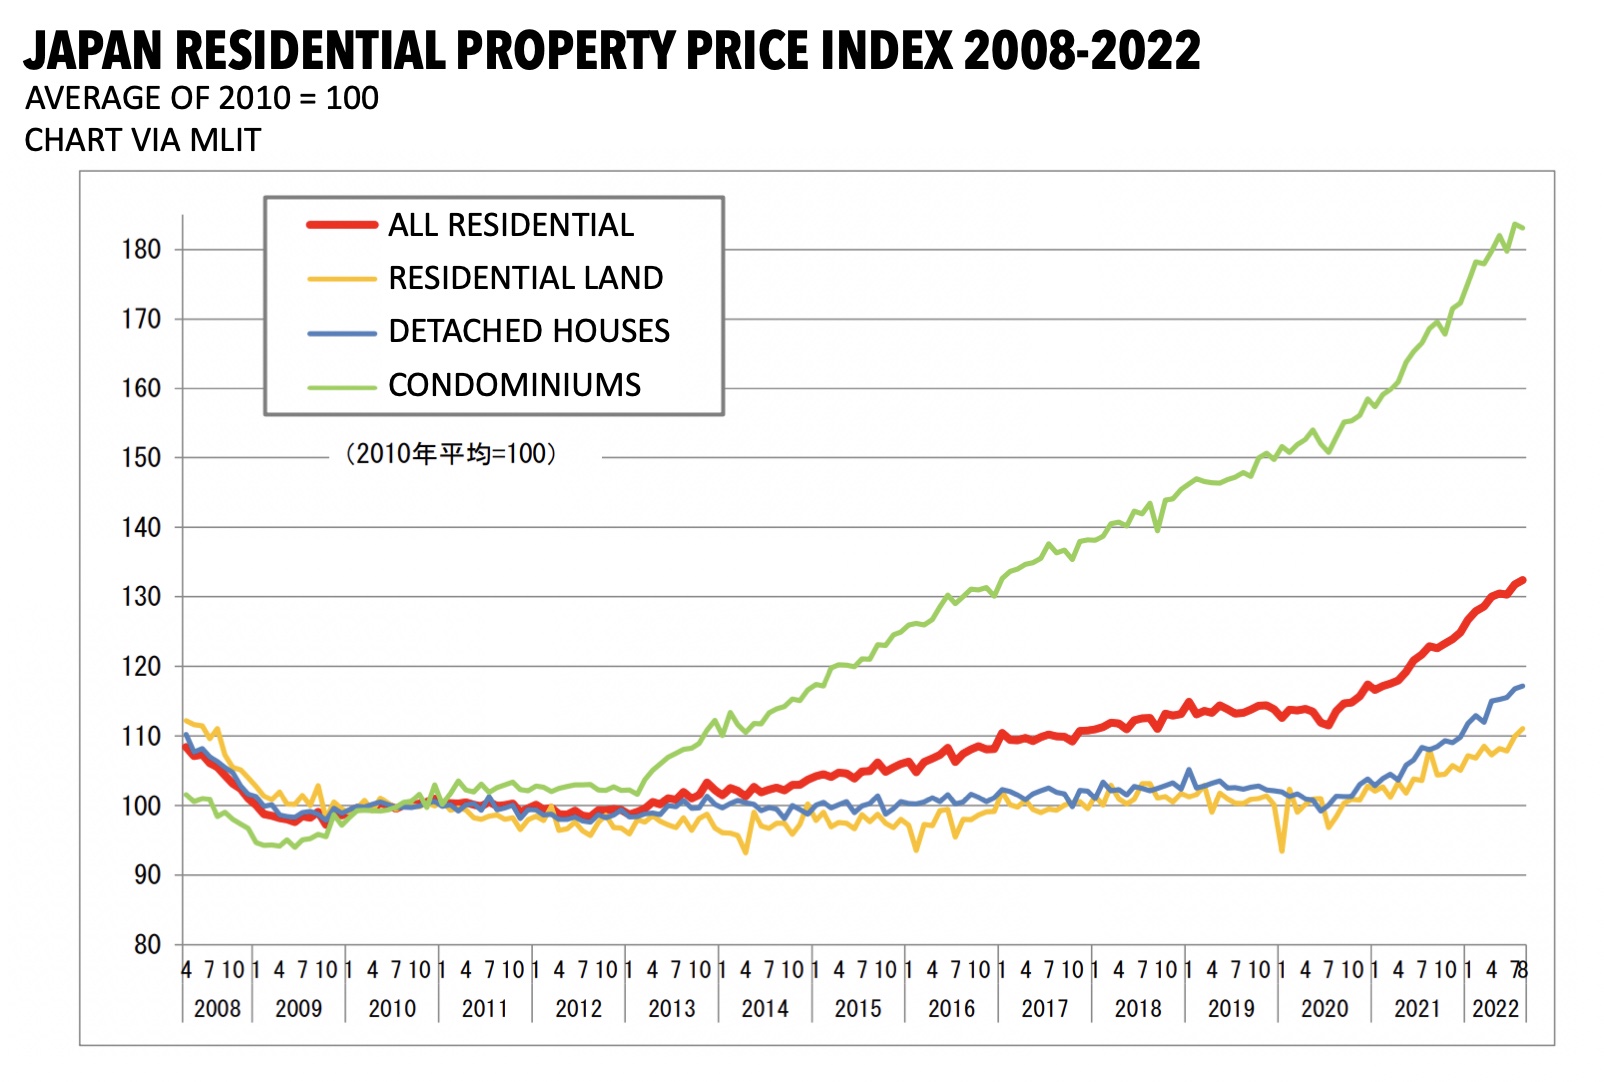 Japan’s property price index illustrates recent growth in house and